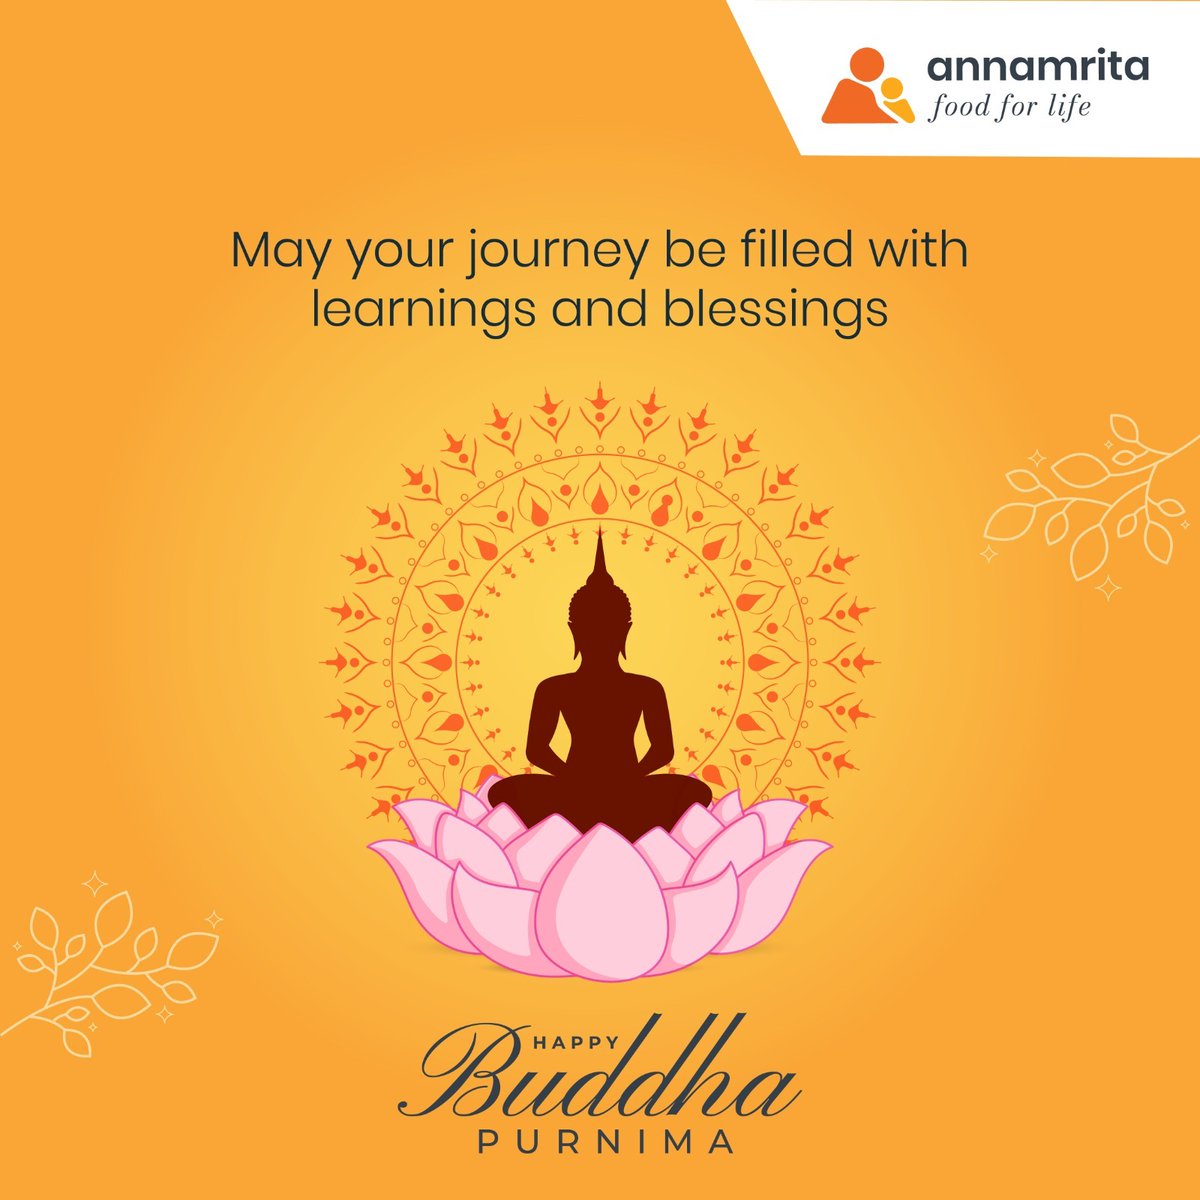 Annamrita Foundation commemorates #BuddhaPurnima by guiding hearts with compassion and minds with wisdom. #annamrita #food #donation #dreams #foodforlife #iskcon #middaymeal #endhunger #endmalnutrition #donate #kindness #csr #development #corporatesocialresponsiblity